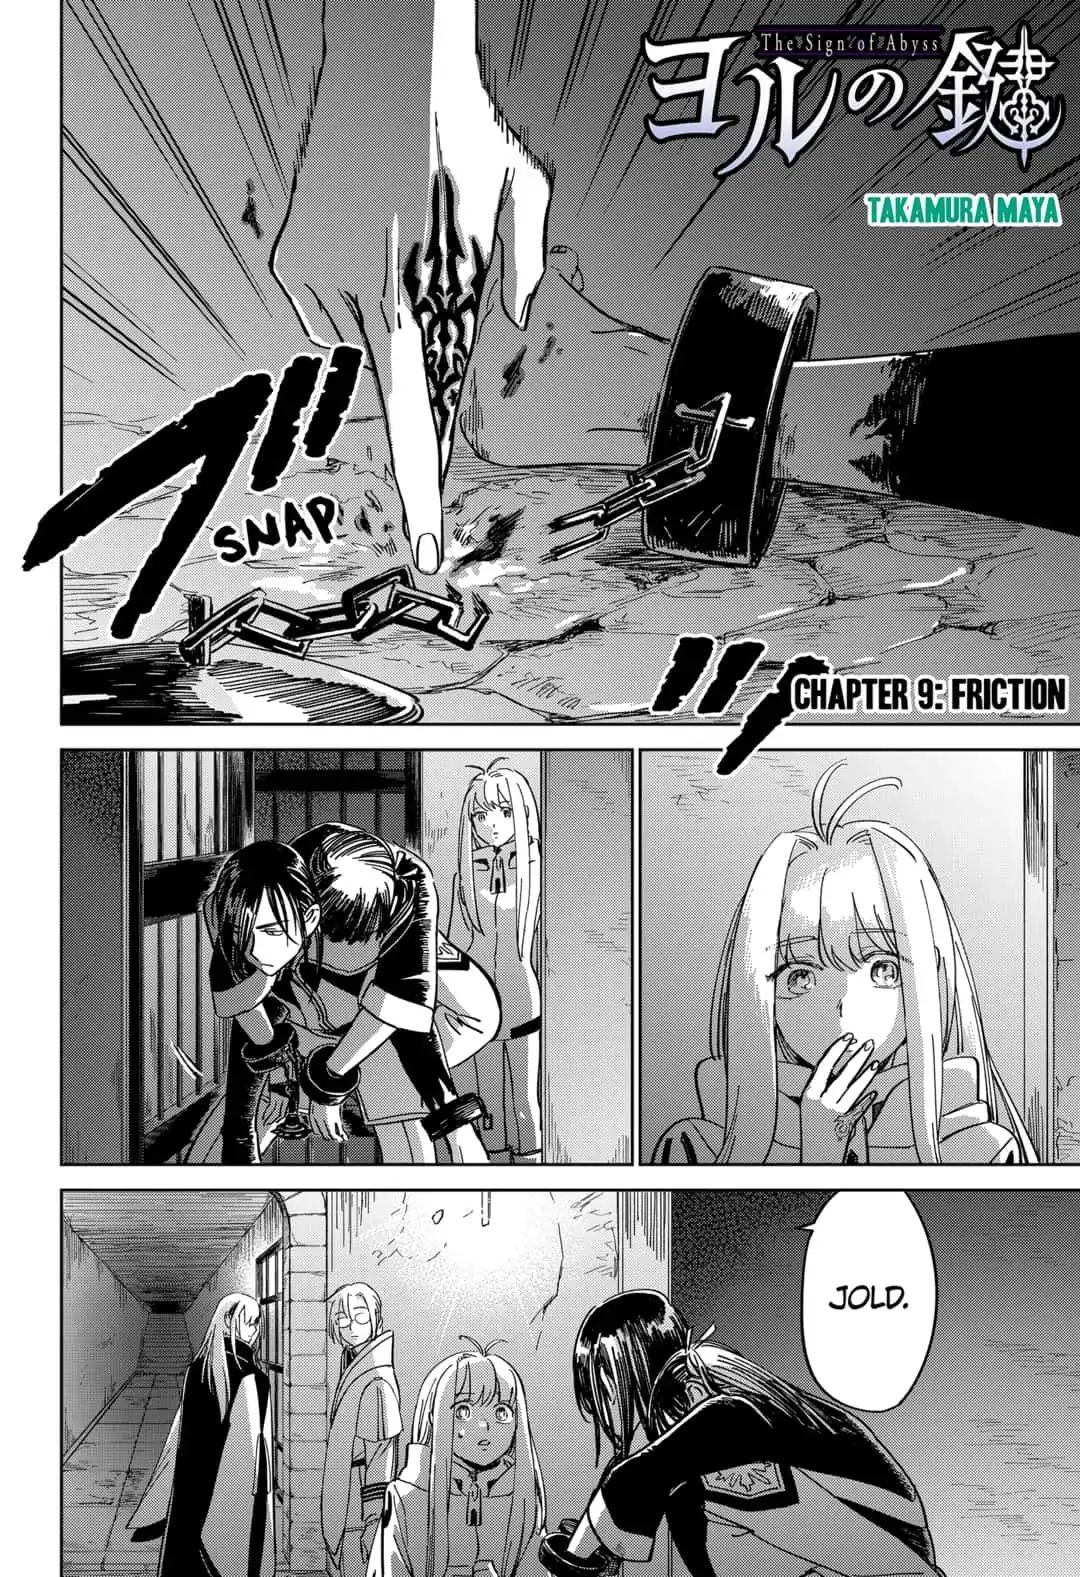 The Sign Of Abyss Chapter 9 #2